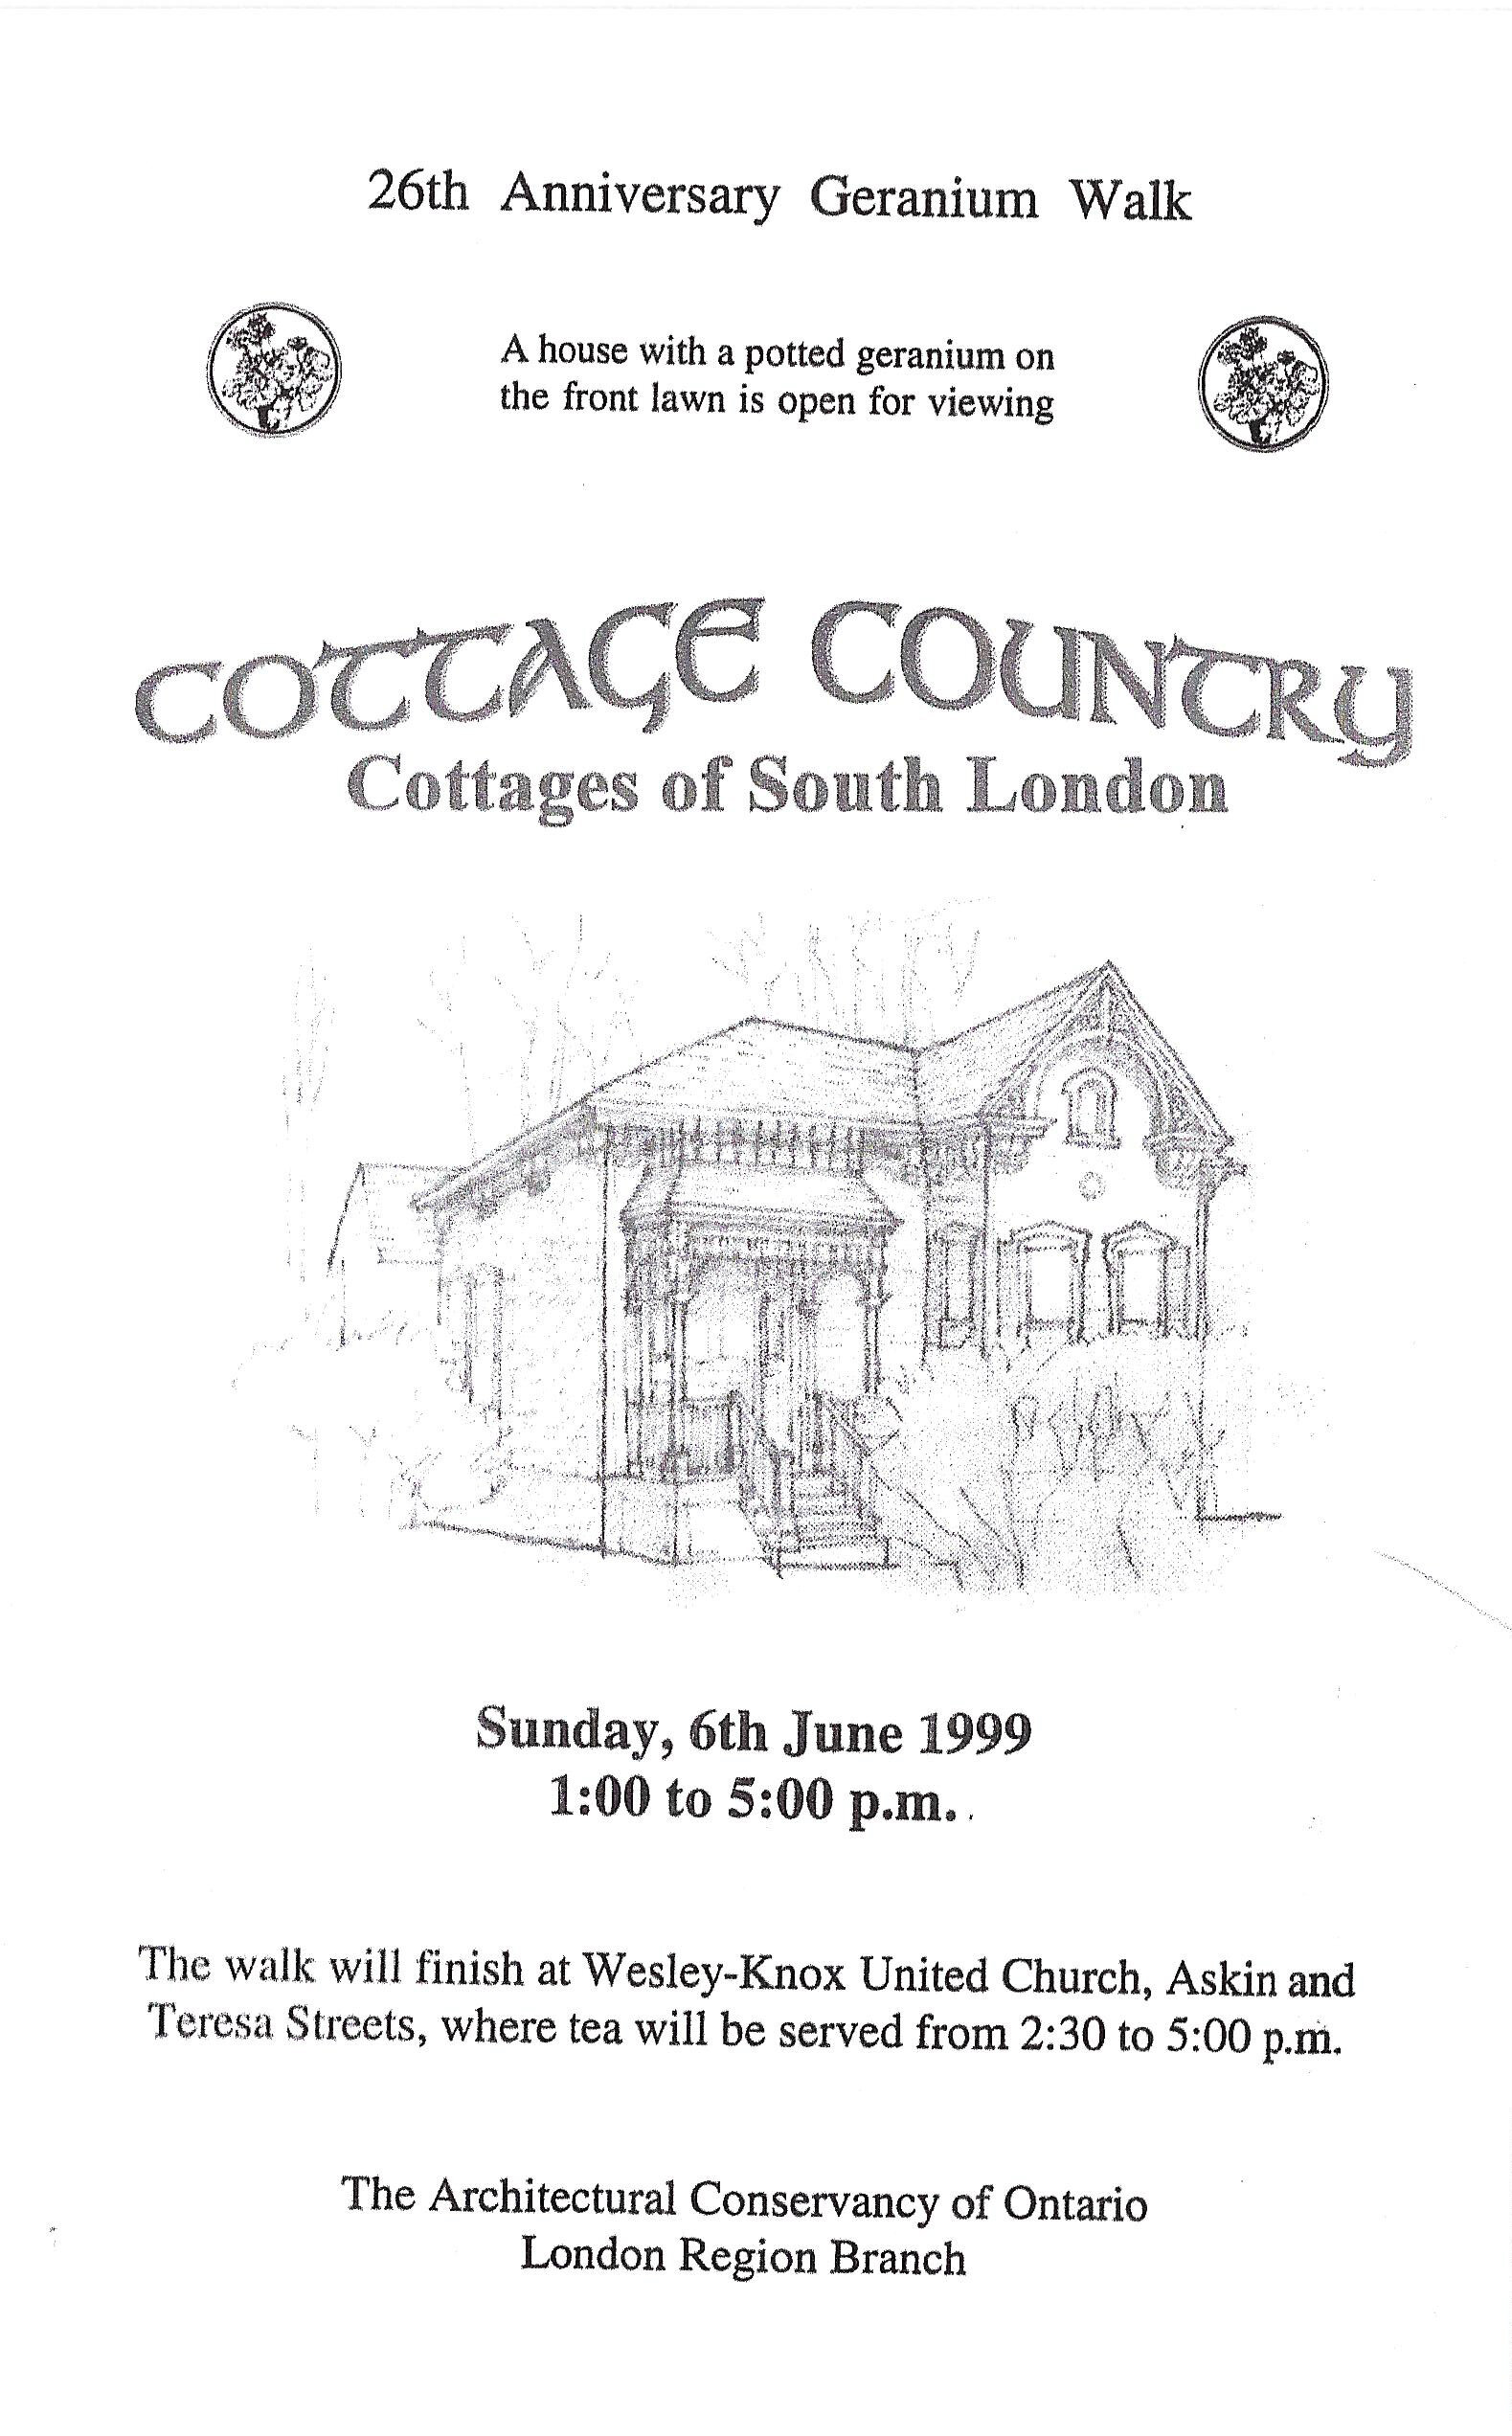 1999_ACO_GHHT_CottageCountryCottagesOfSouthLondon-1.jpg